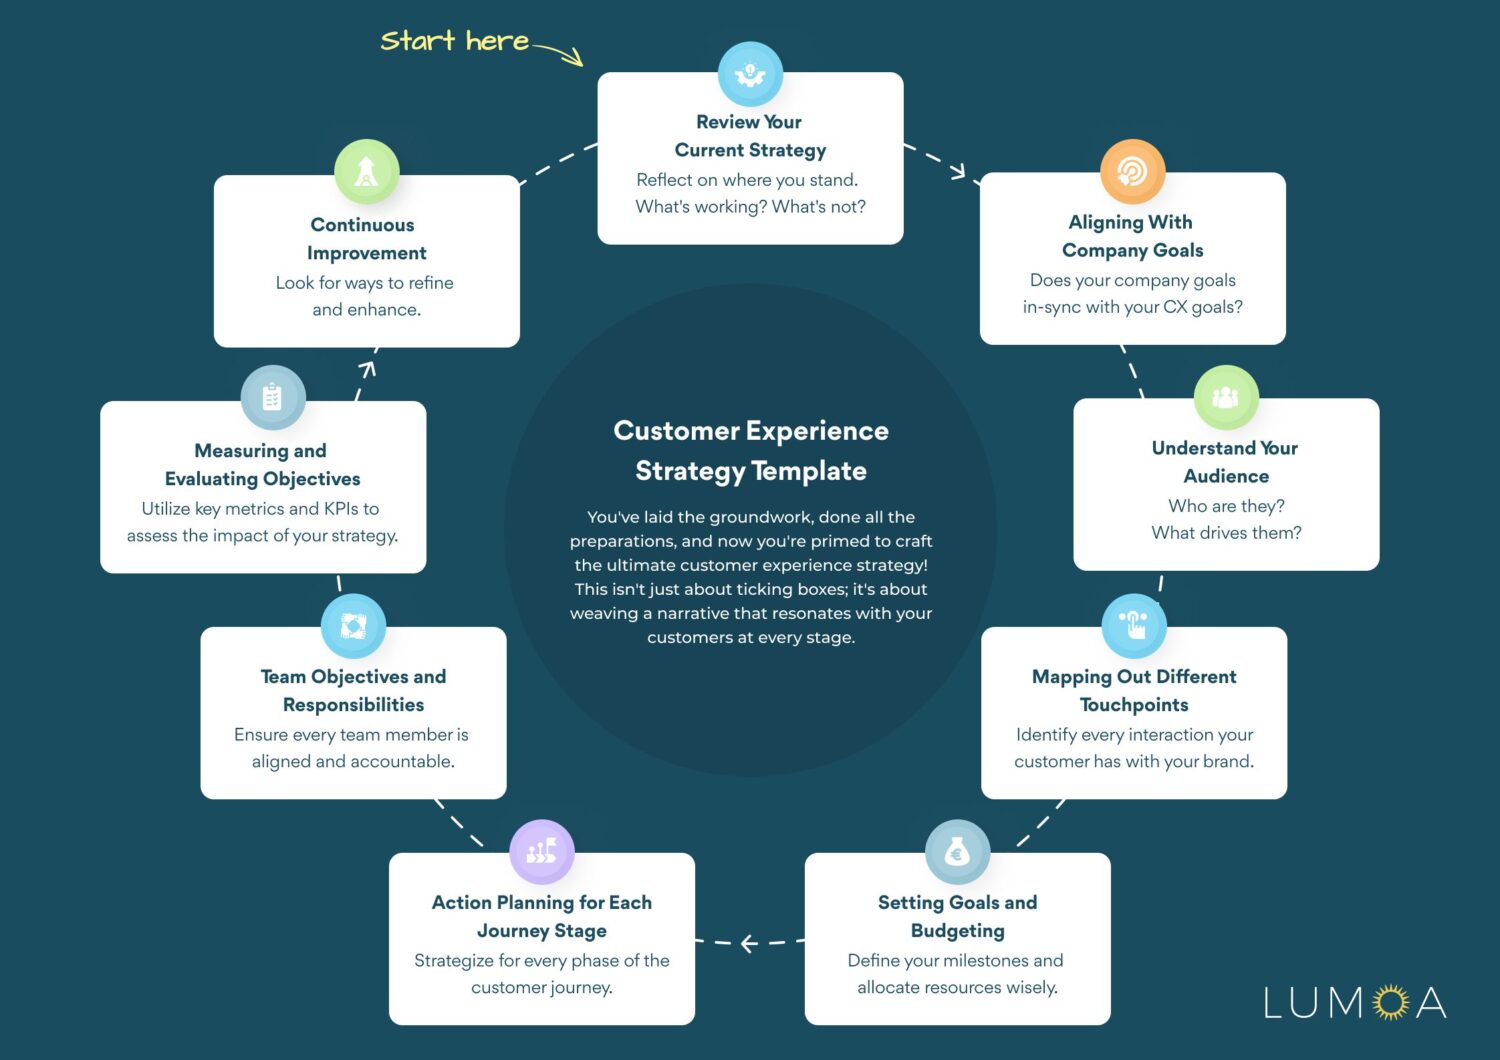 Customer Experience Strategy: Template